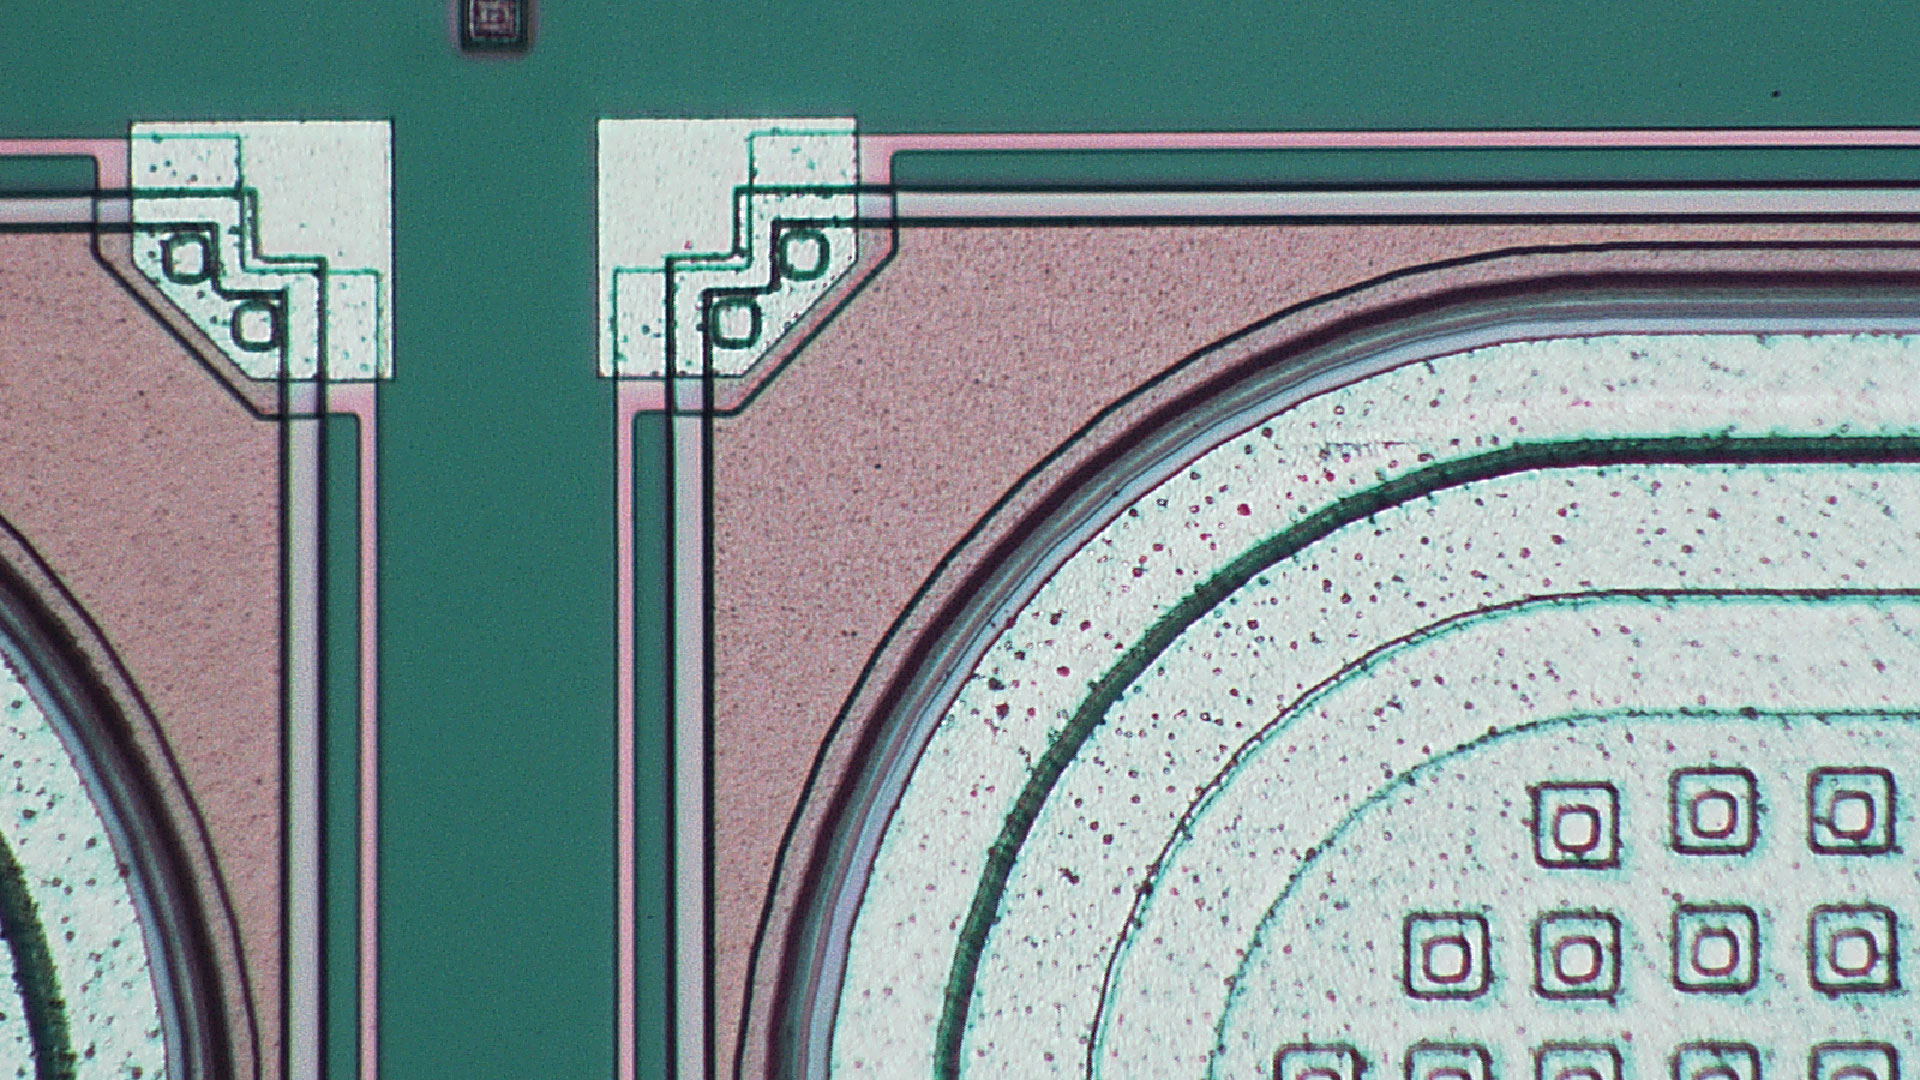 [Translate to portuquese:] To better see fine details and defects, a semiconductor material can be inspected using a microscope with various types of lighting. This image was taken with coaxial illumination. 